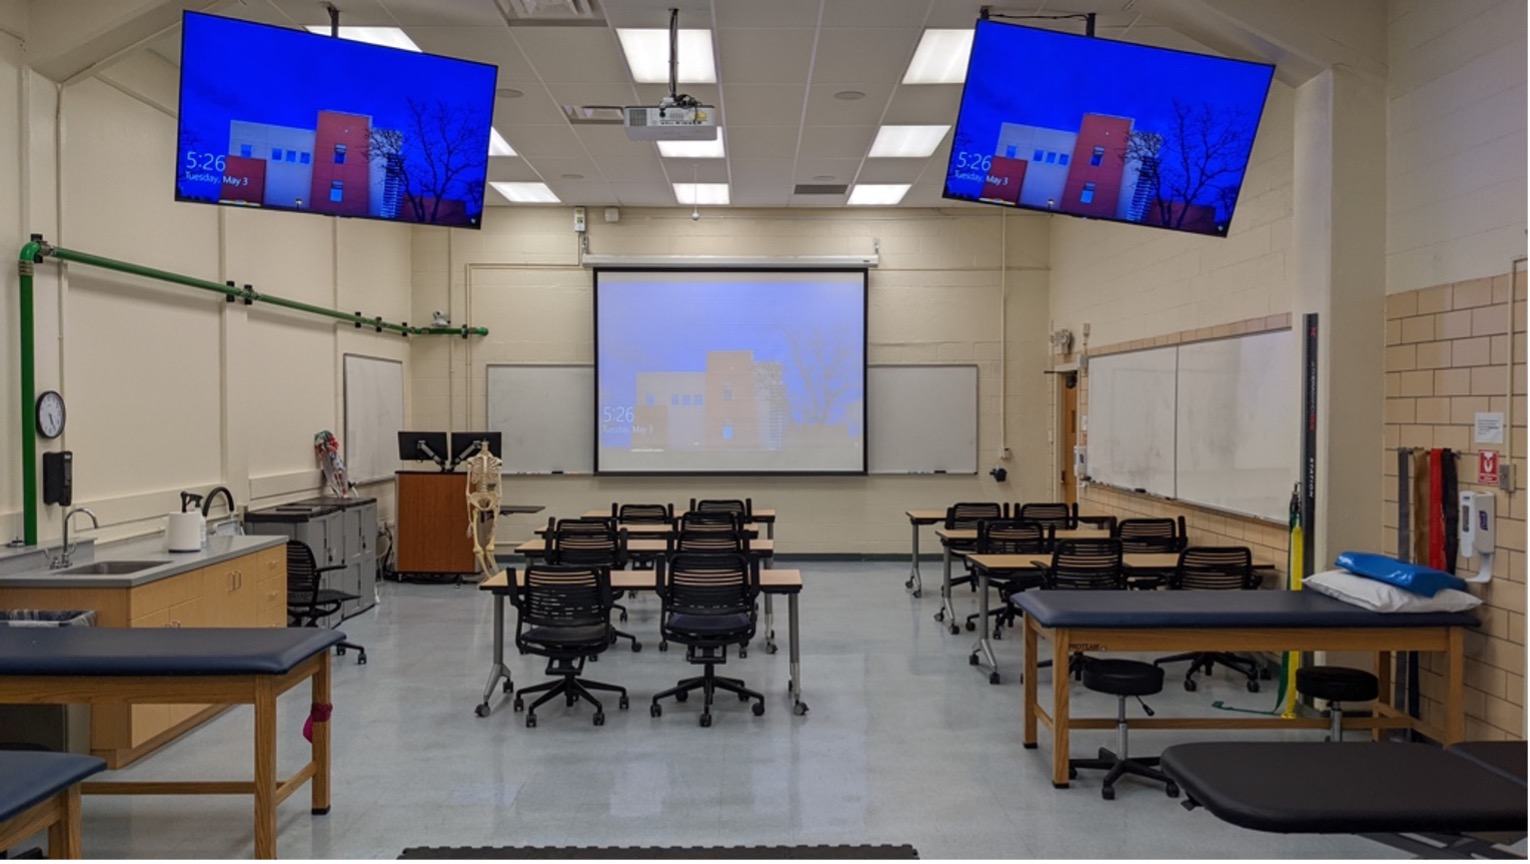 Athletic training program lab room with desks, tvs, and white boards